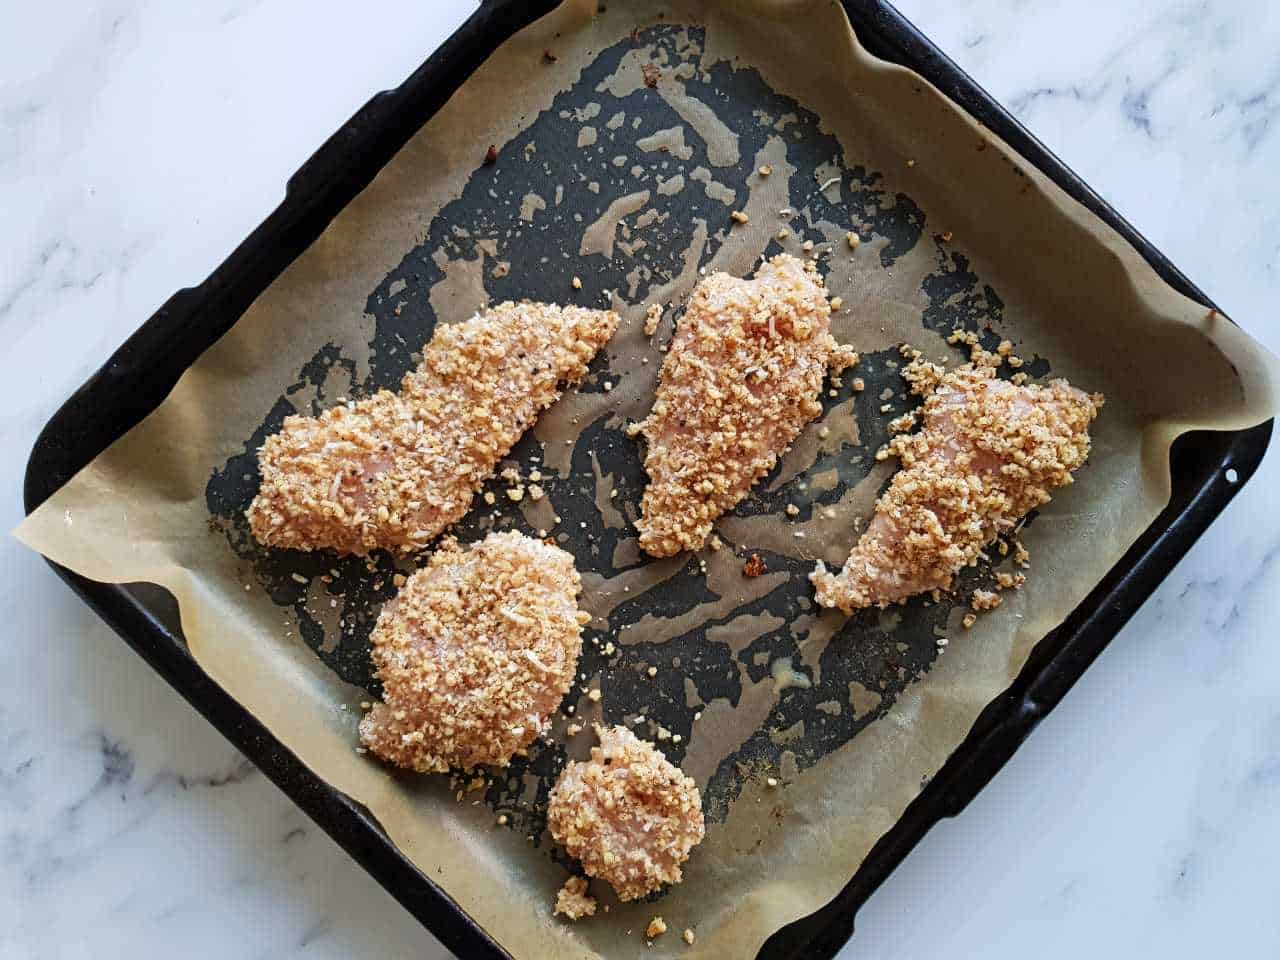 Uncooked walnut crusted chicken on a baking tray on a marble table.